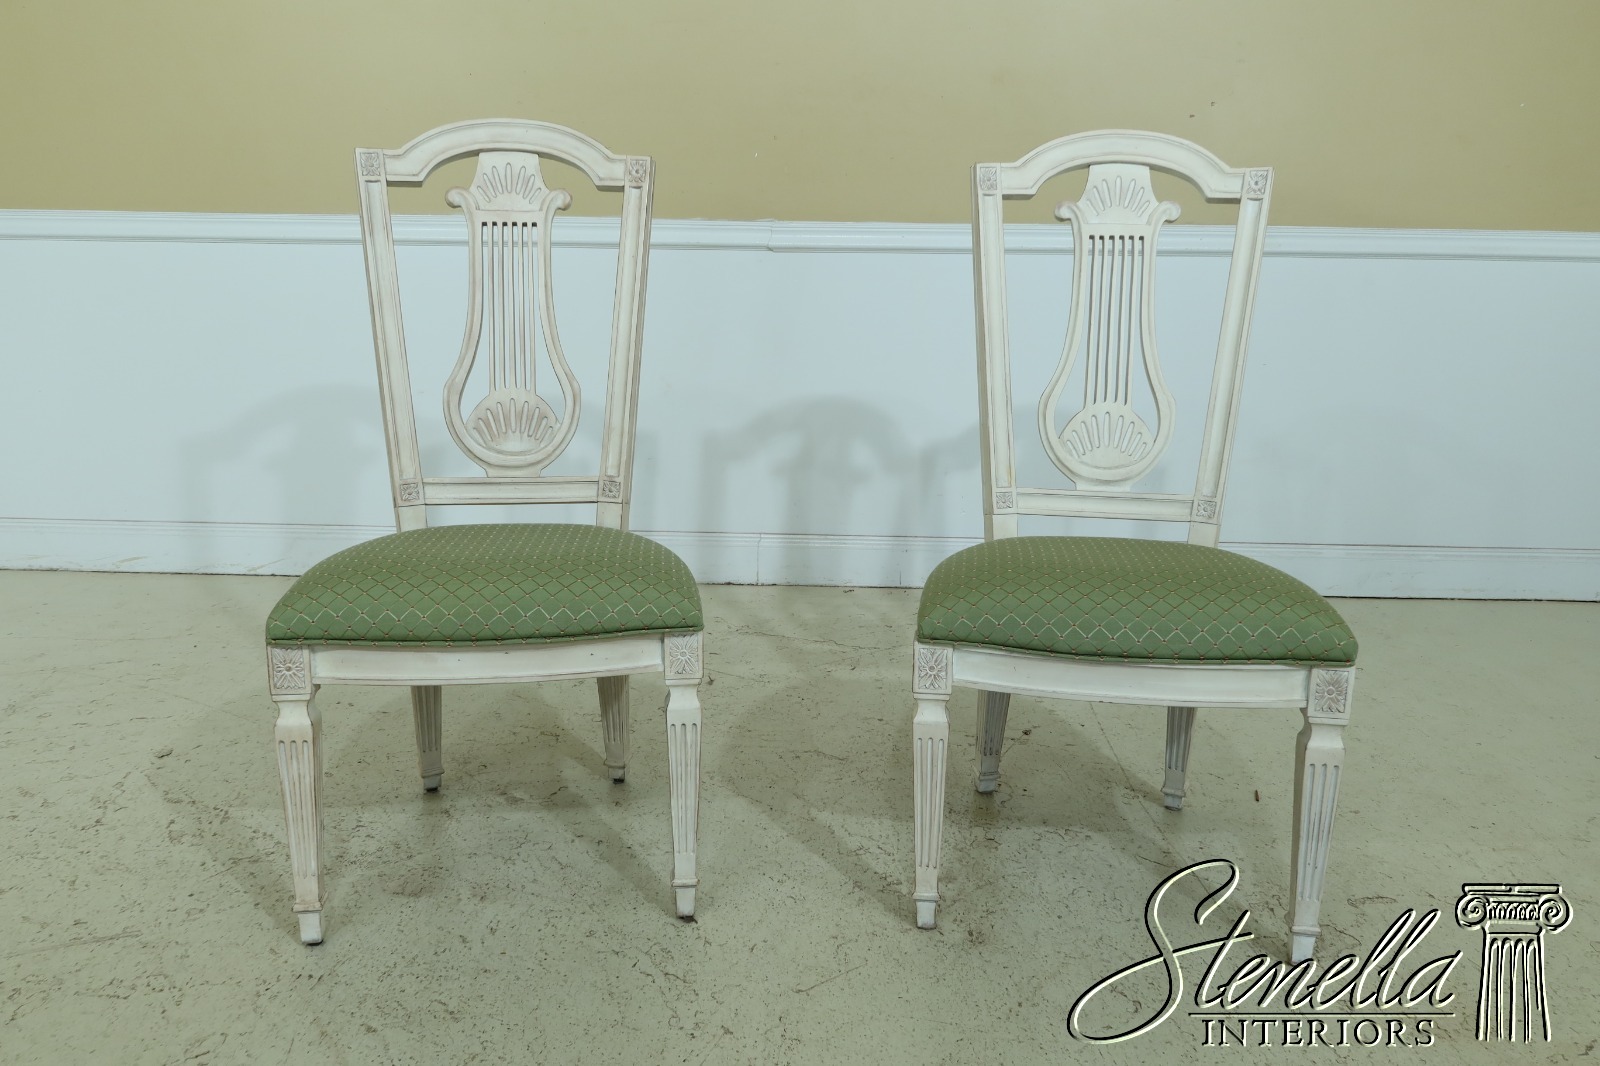 L32296EC: Set Of 6 Italian Style White Painted Dining Room Chairs | eBay